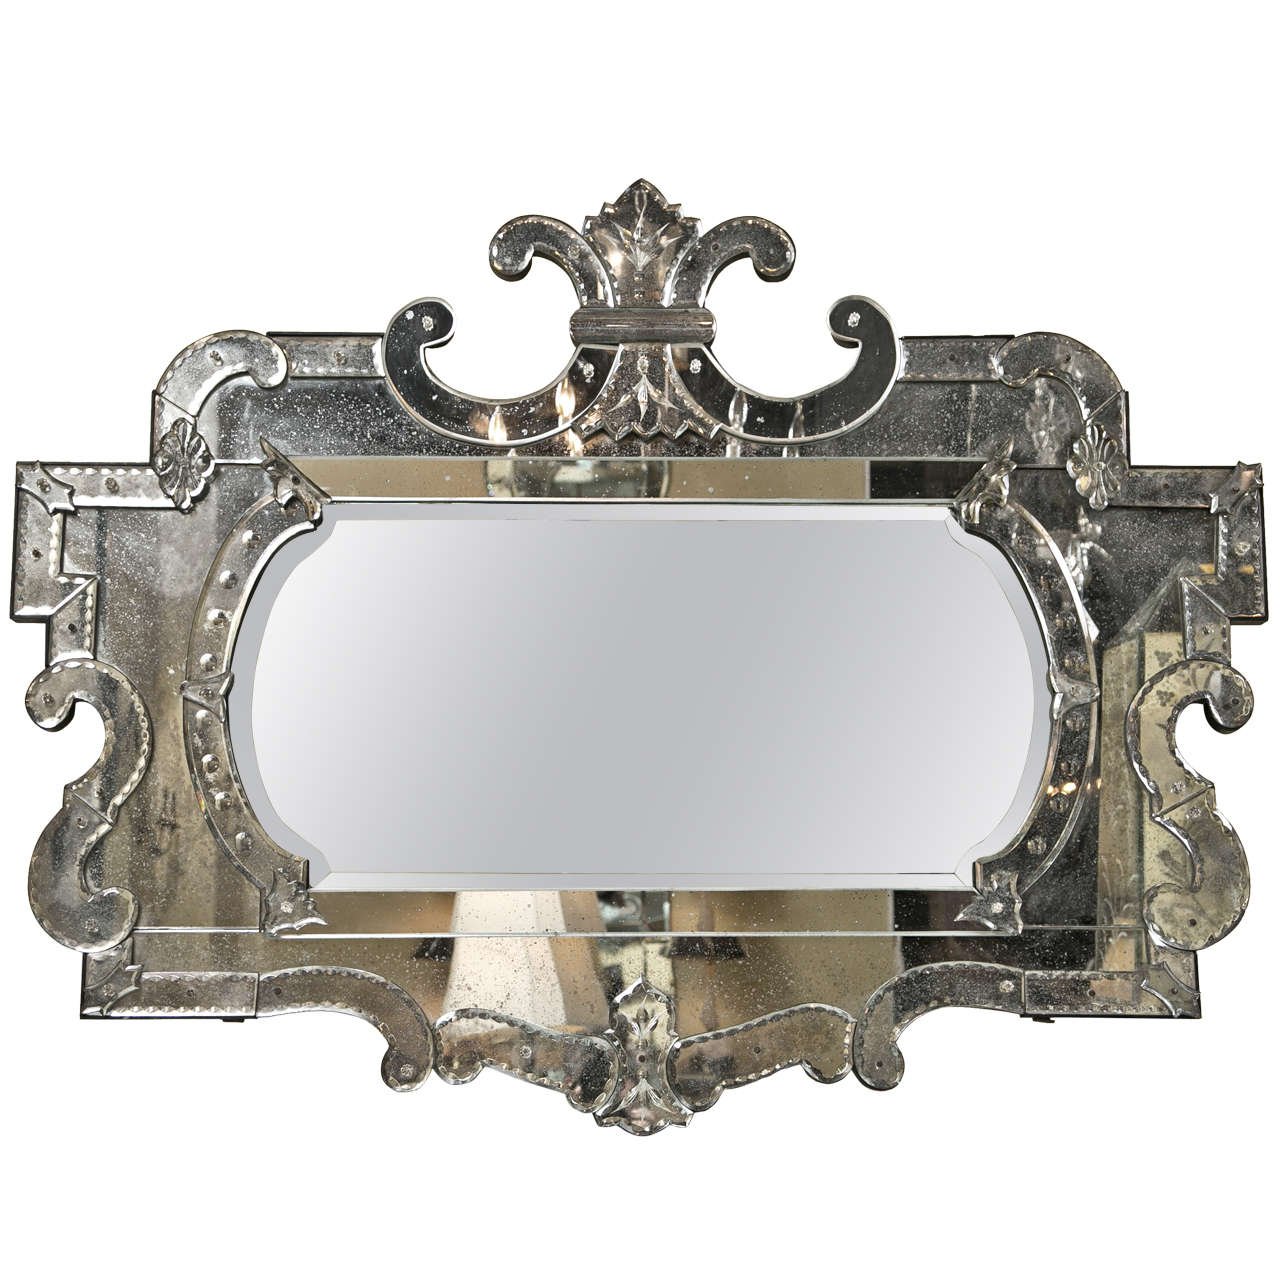 Venetian Style Over the Mantle Mirror